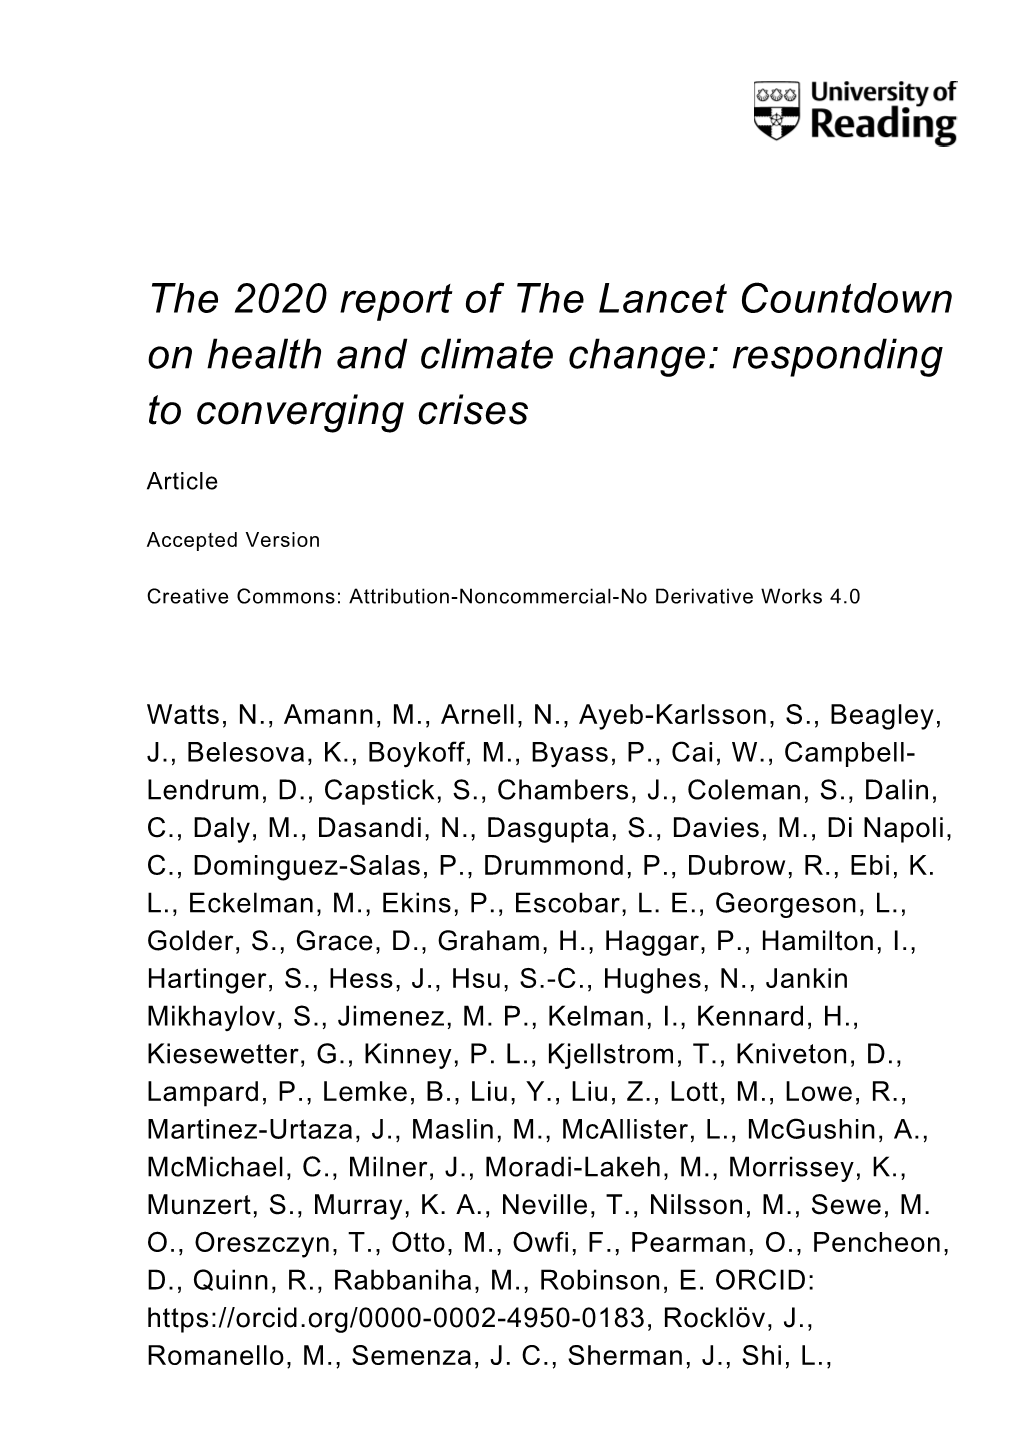 The 2020 Report of the Lancet Countdown on Health and Climate Change: Responding to Converging Crises